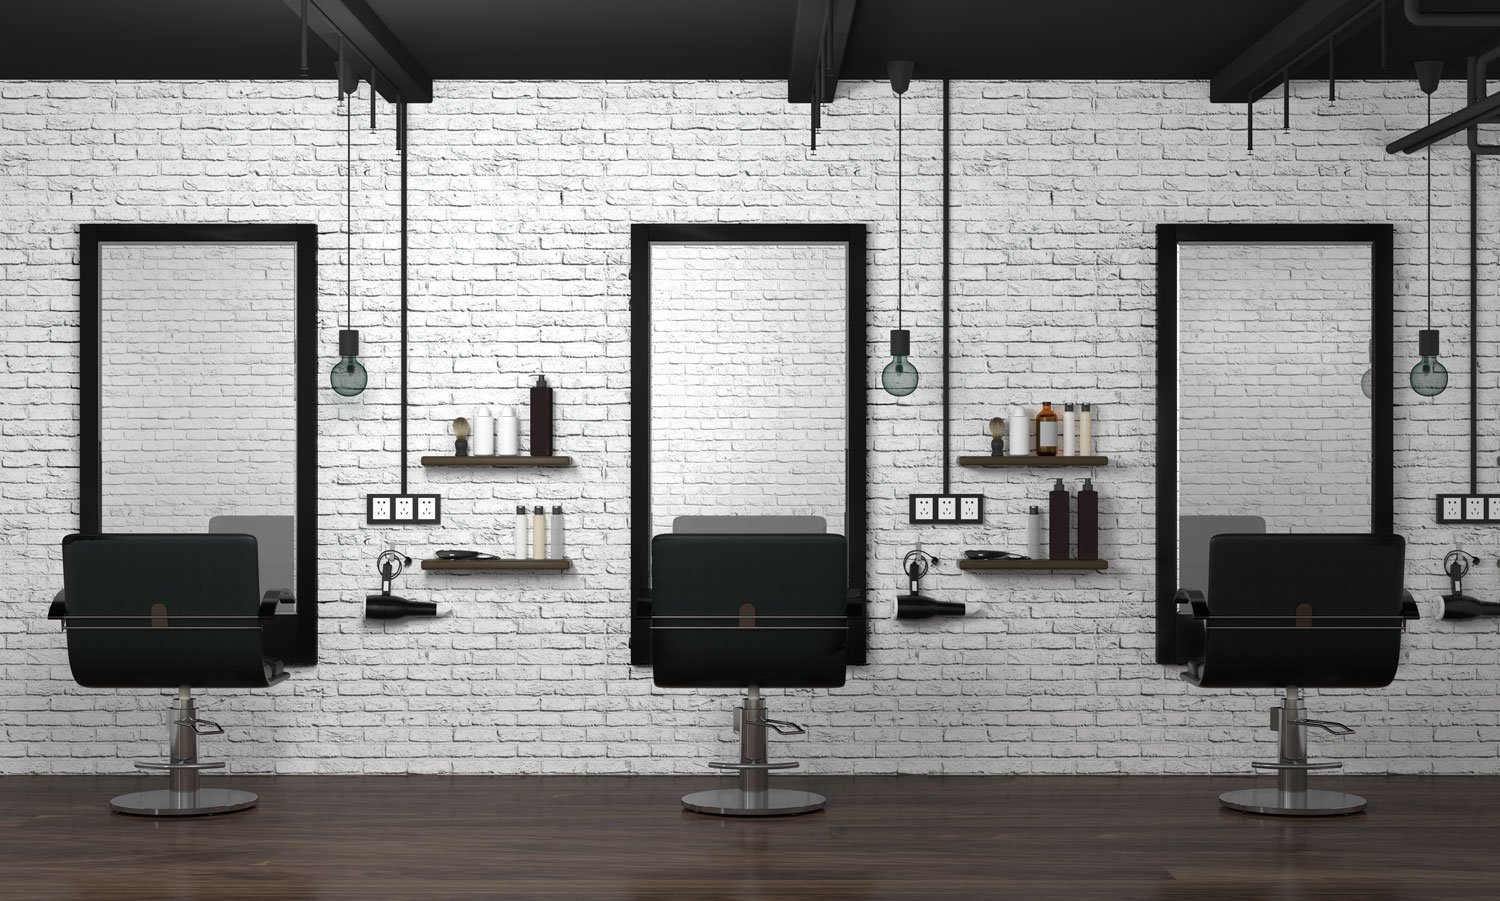 Design Thinking In Action: How One Hair Salon Franchise Innovated To The Top